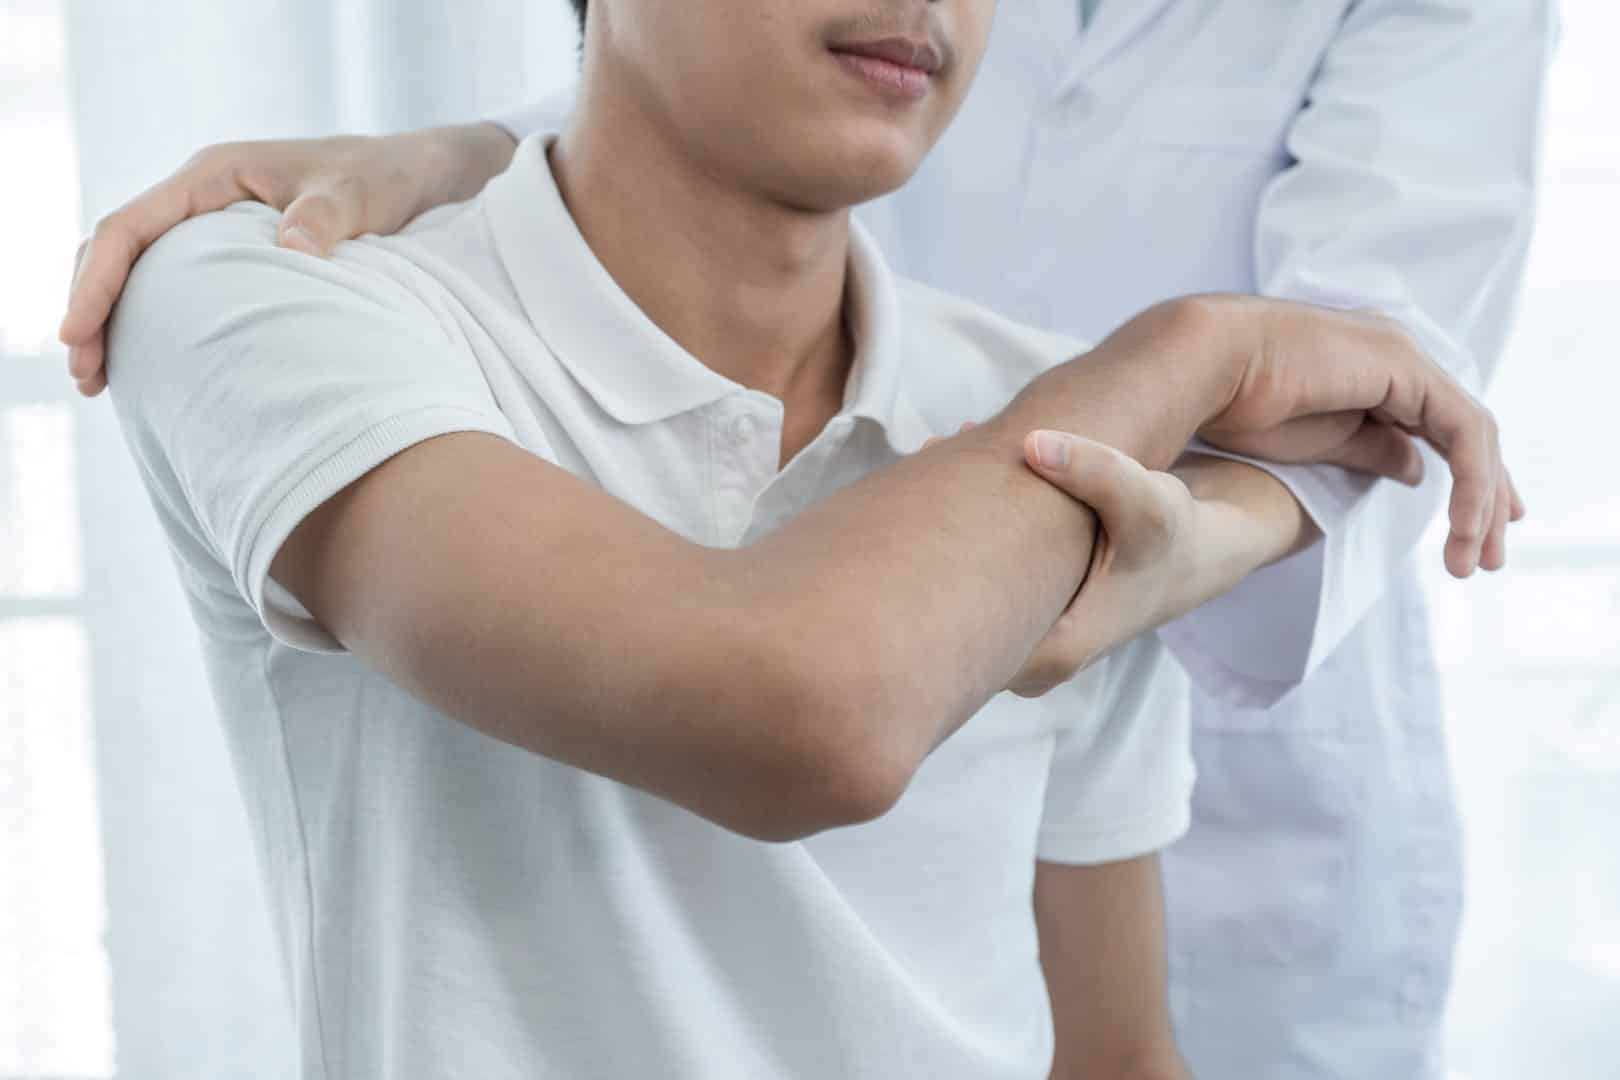 doctor examining patient's shoulder and arm